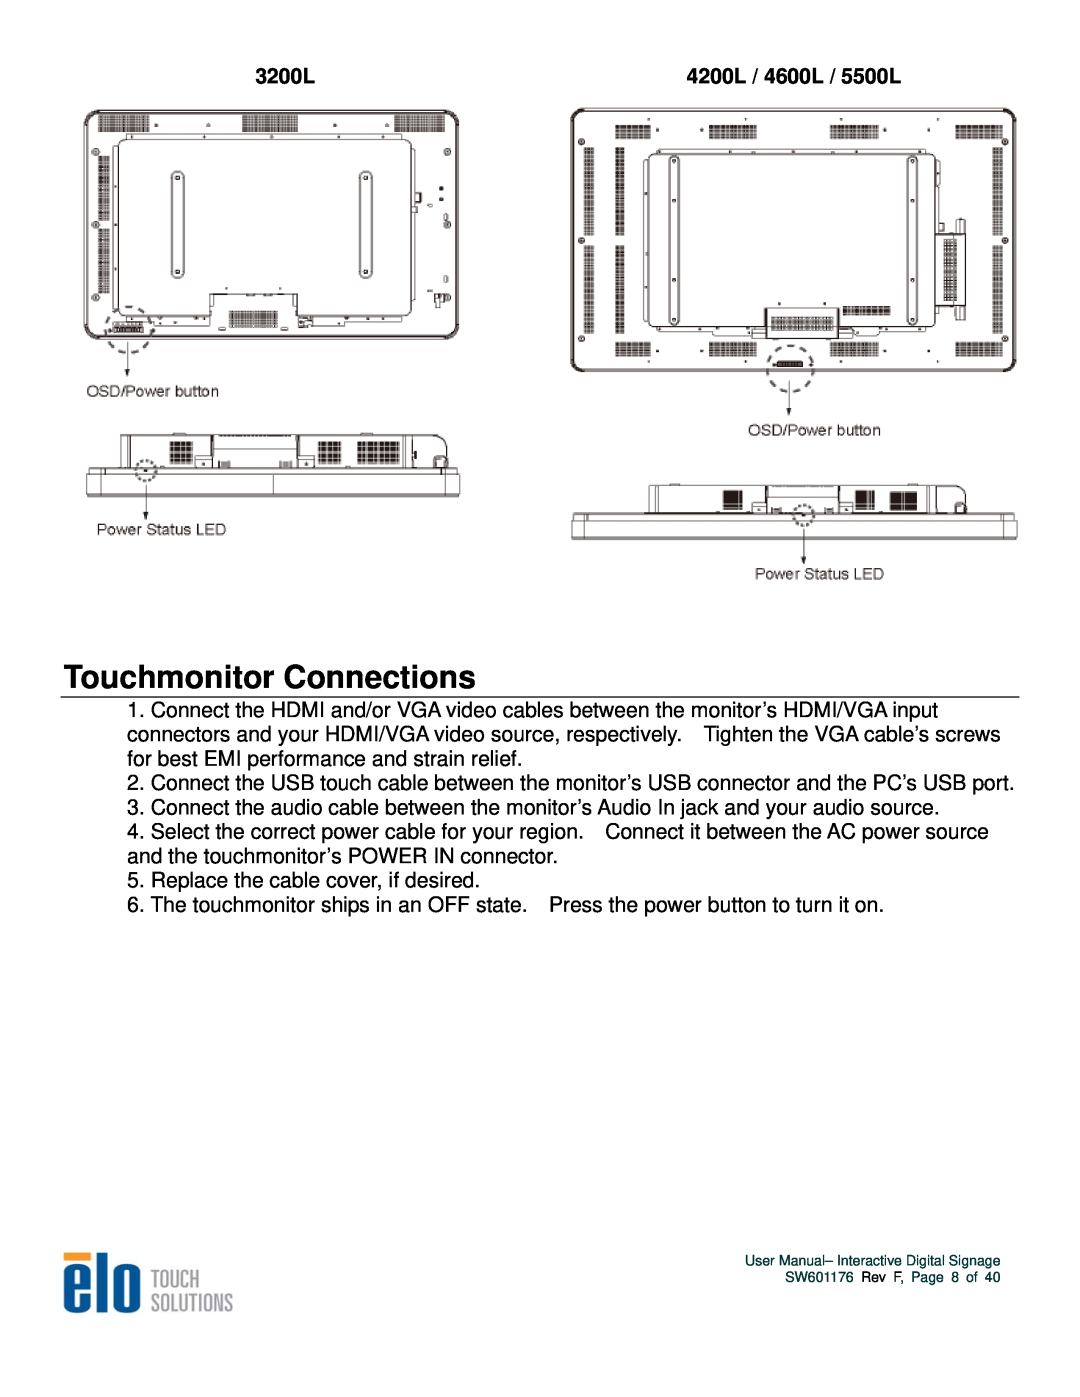 Elo TouchSystems user manual Touchmonitor Connections, 3200L, 4200L / 4600L / 5500L 